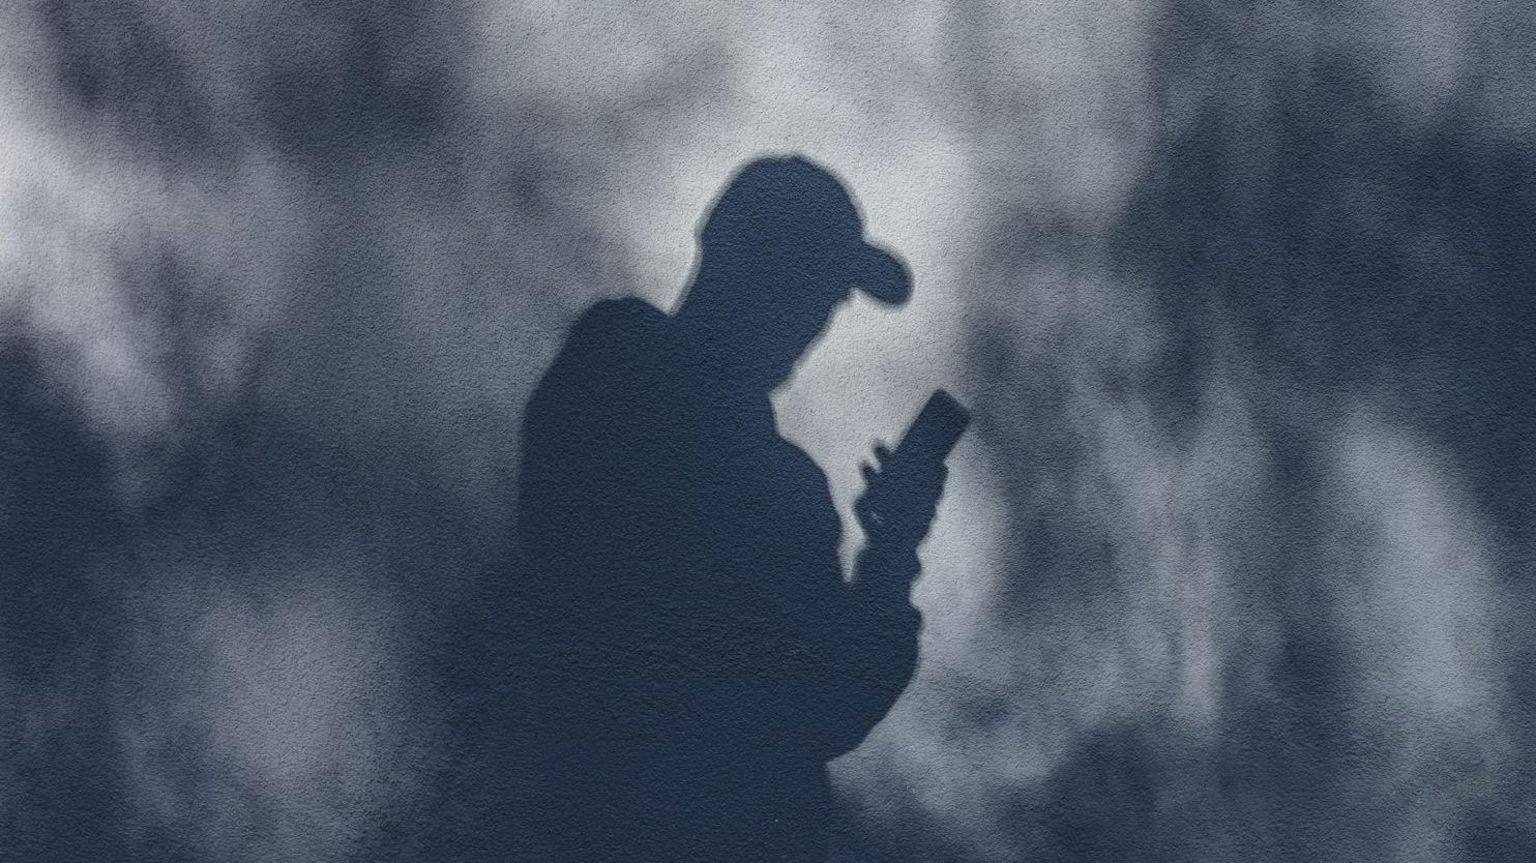 Shadow of a man in a baseball cap holding a phone